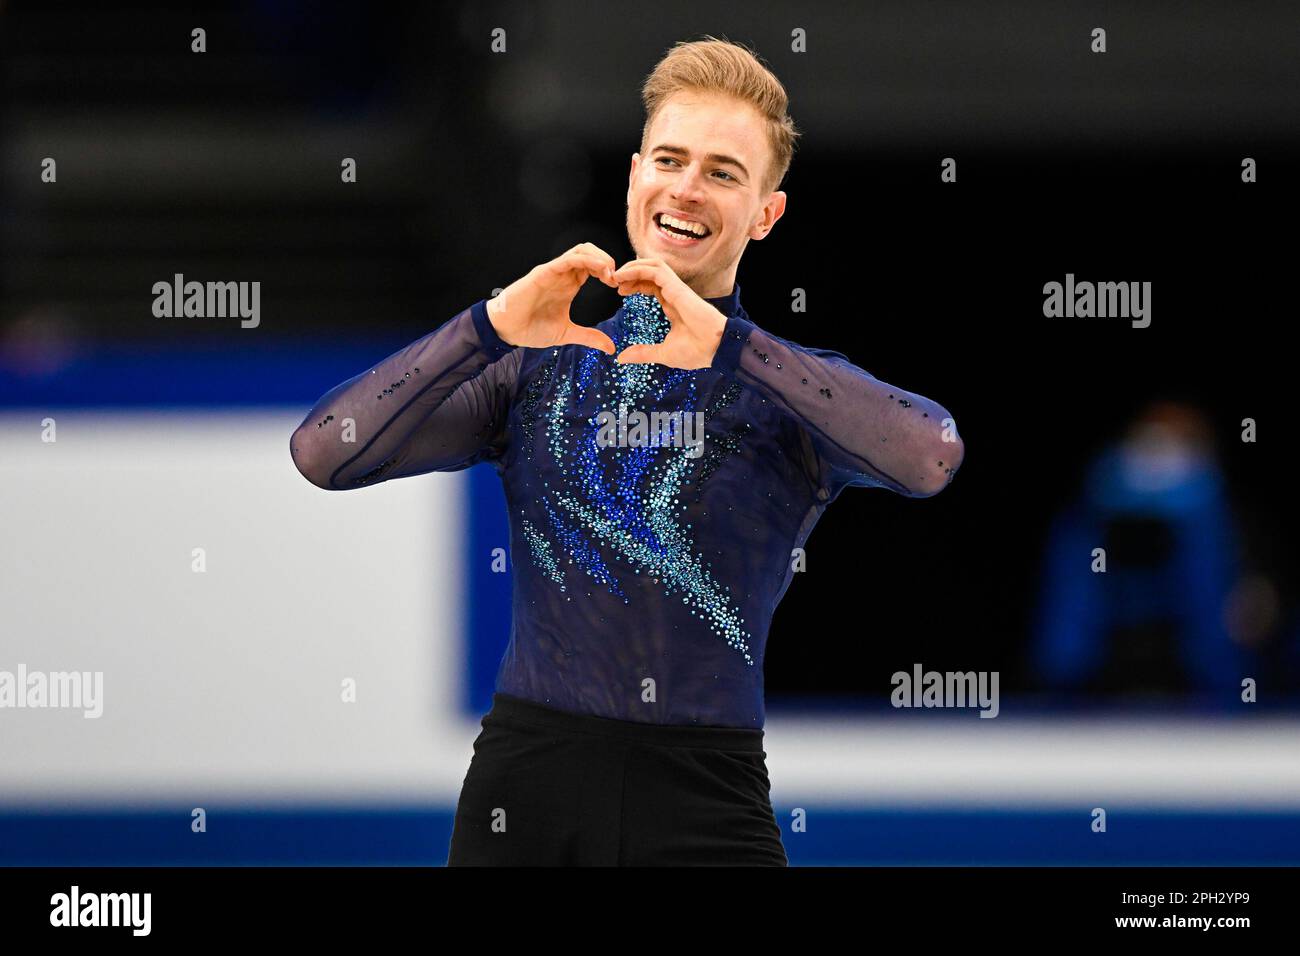 SAITAMA, JAPAN - MARCH 25: Filip Taschler of Czech Republic competes in the Ice Dance Free Dance during the ISU World Figure Skating Championships 2023 at Saitama Super Arena on March 25, 2023 in Saitama, Japan (Photo by Pablo Morano/BSR Agency) Stock Photo